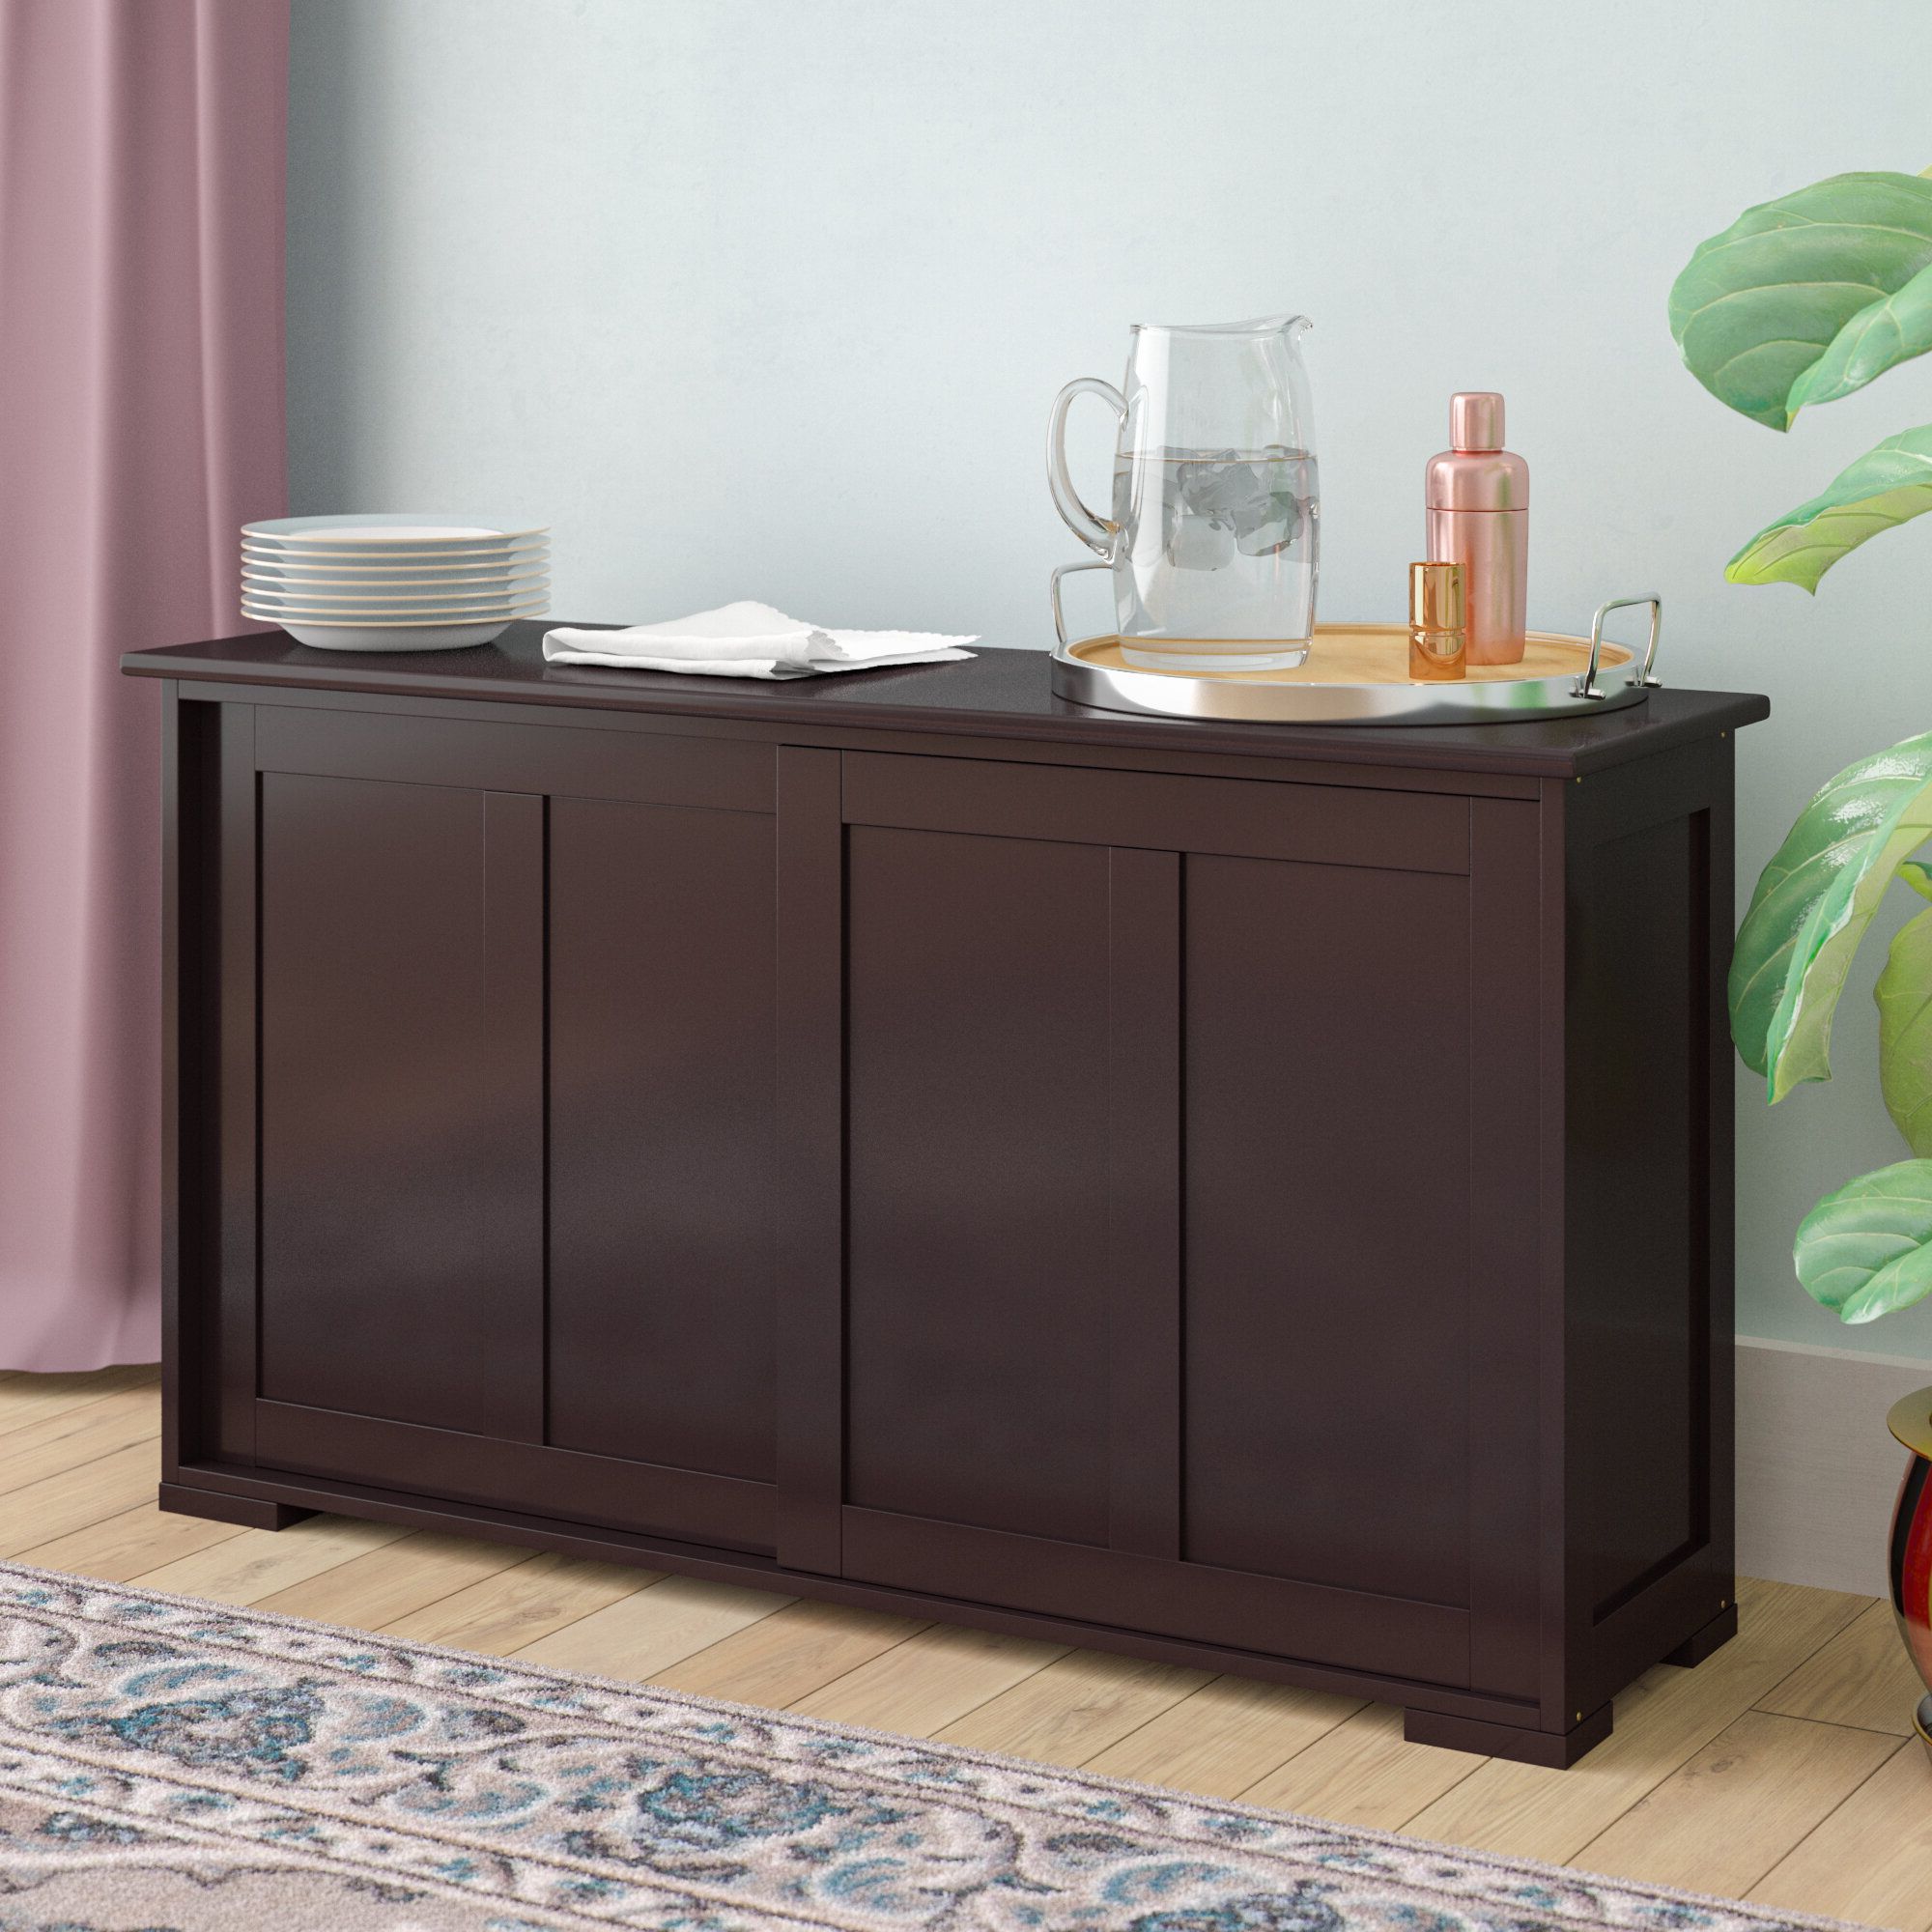 Sideboards & Buffet Tables You'll Love In 2019 | Wayfair Inside Chicoree Charlena Sideboards (Gallery 17 of 20)